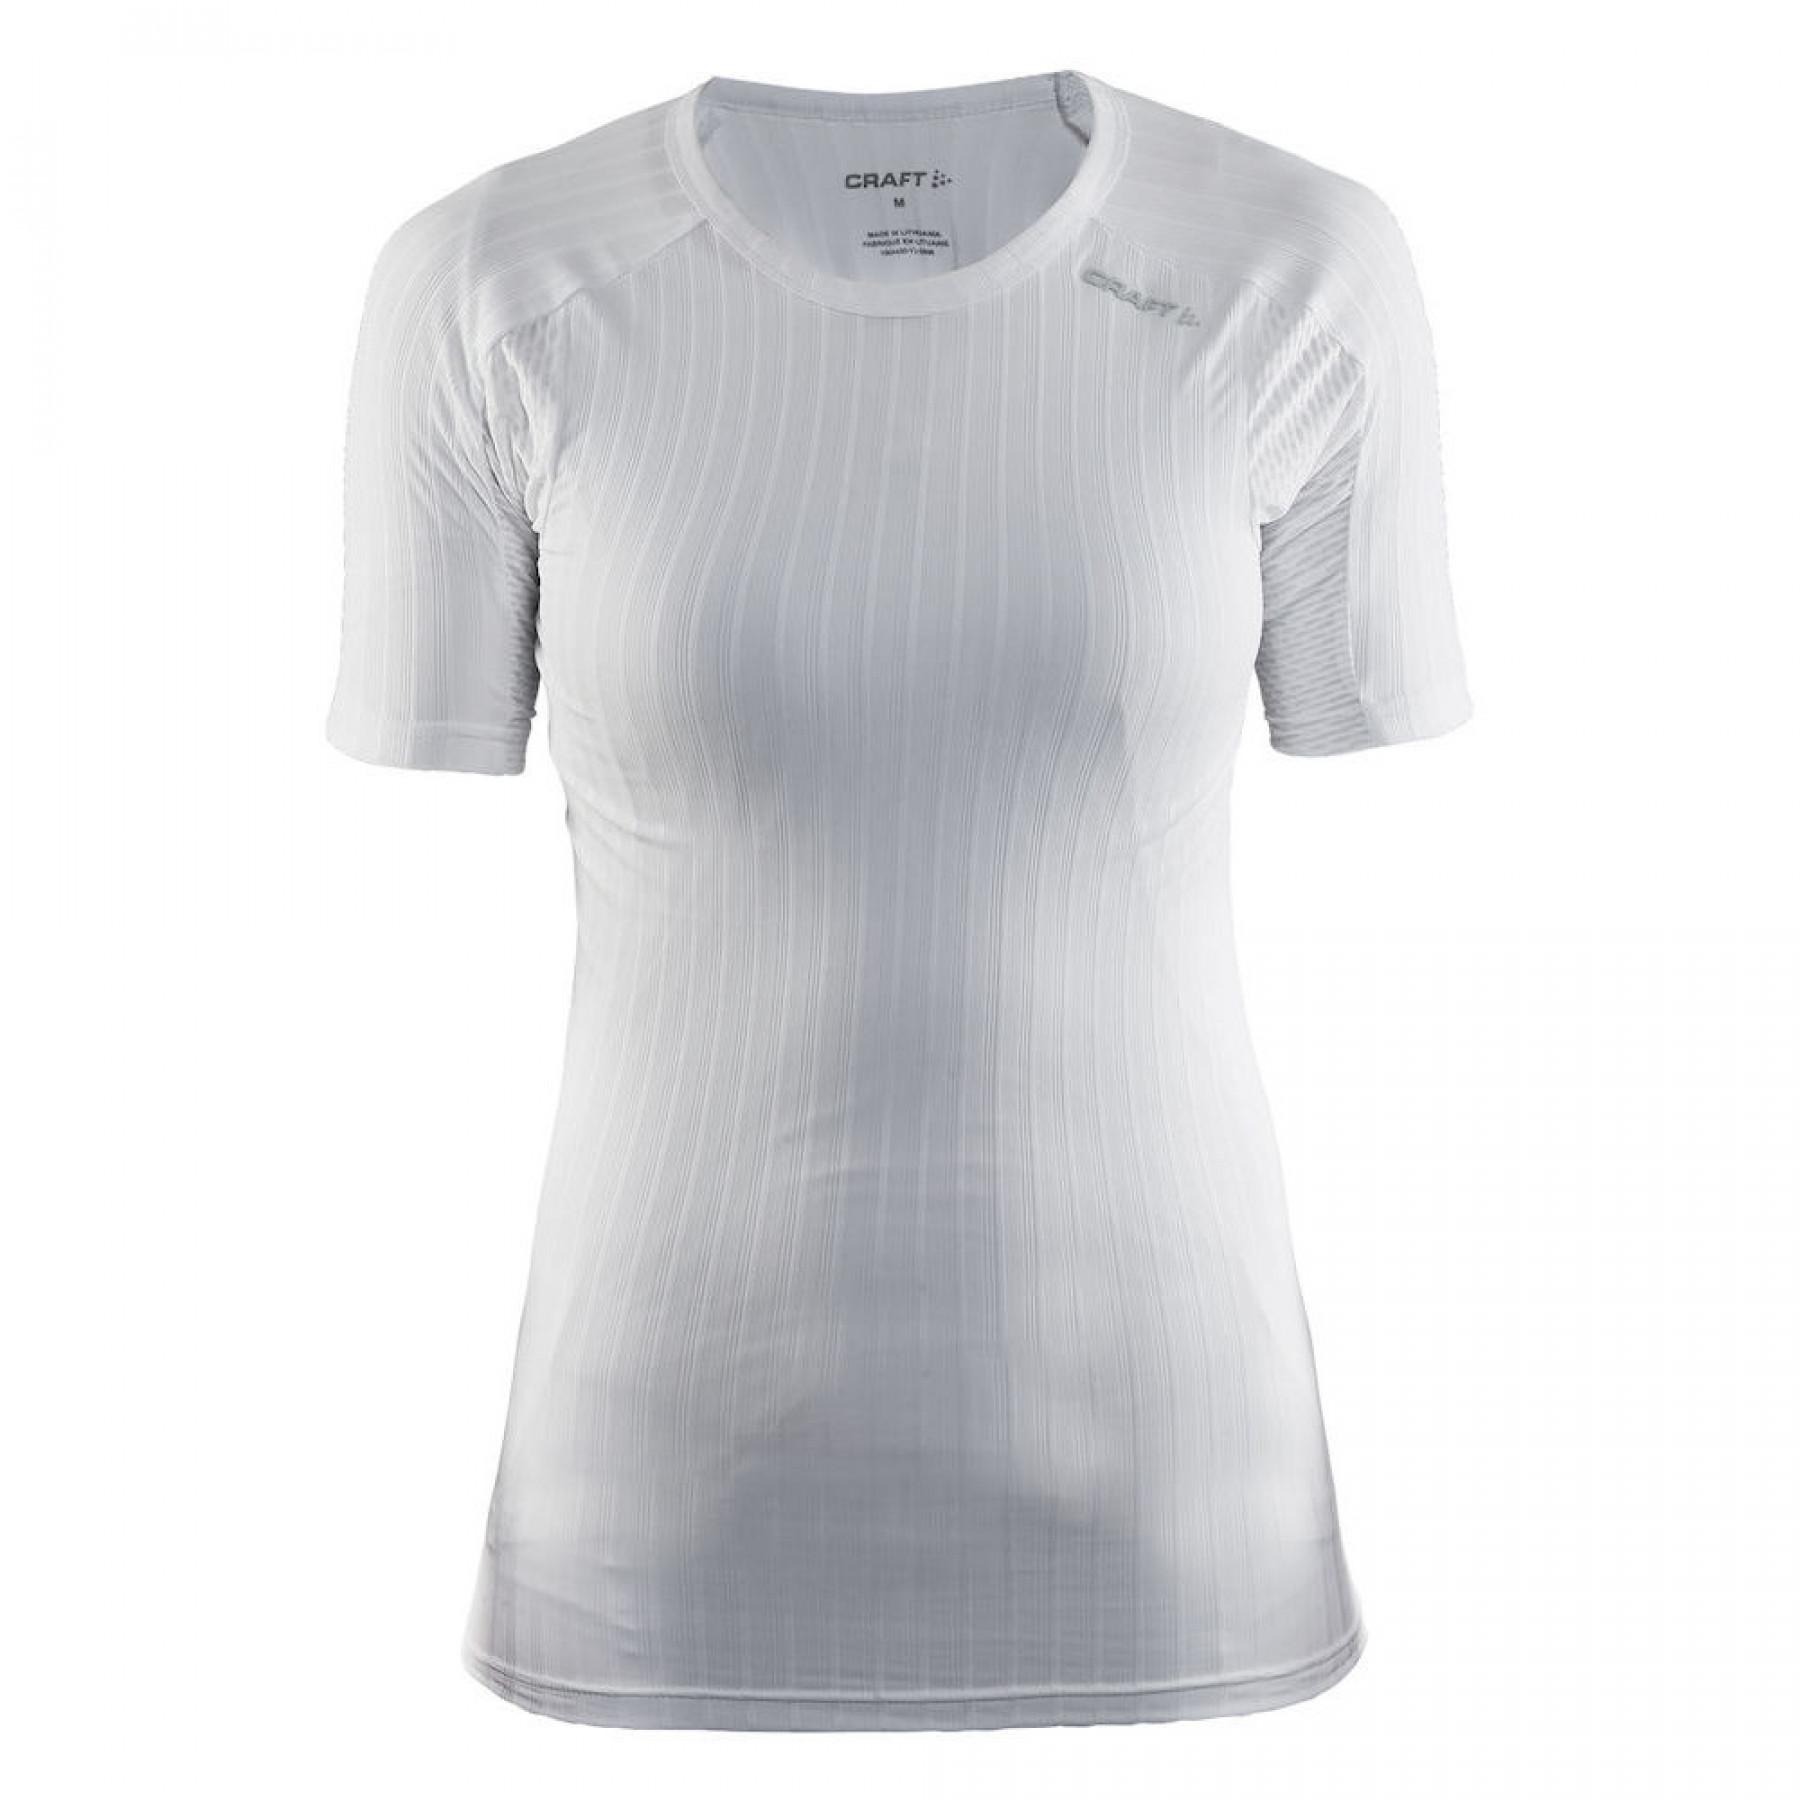 Women's T-shirt Craft be active extreme 2.0